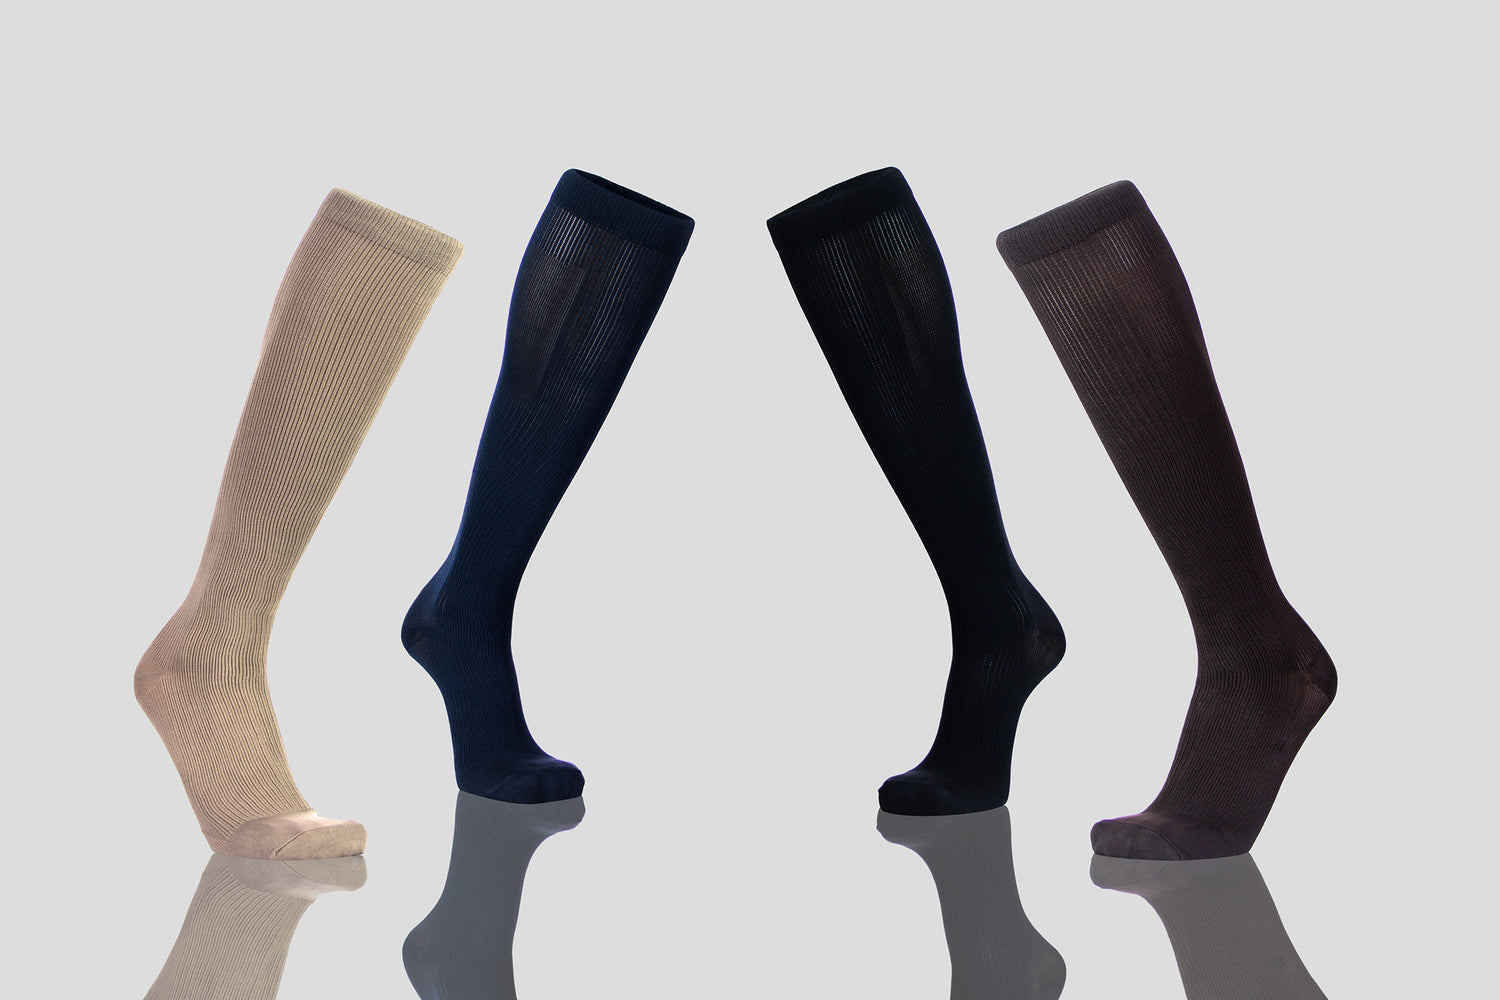 Image Showing Compression Socks In 4 Colors With Thick Fabric - Light Grey Background With Shadow